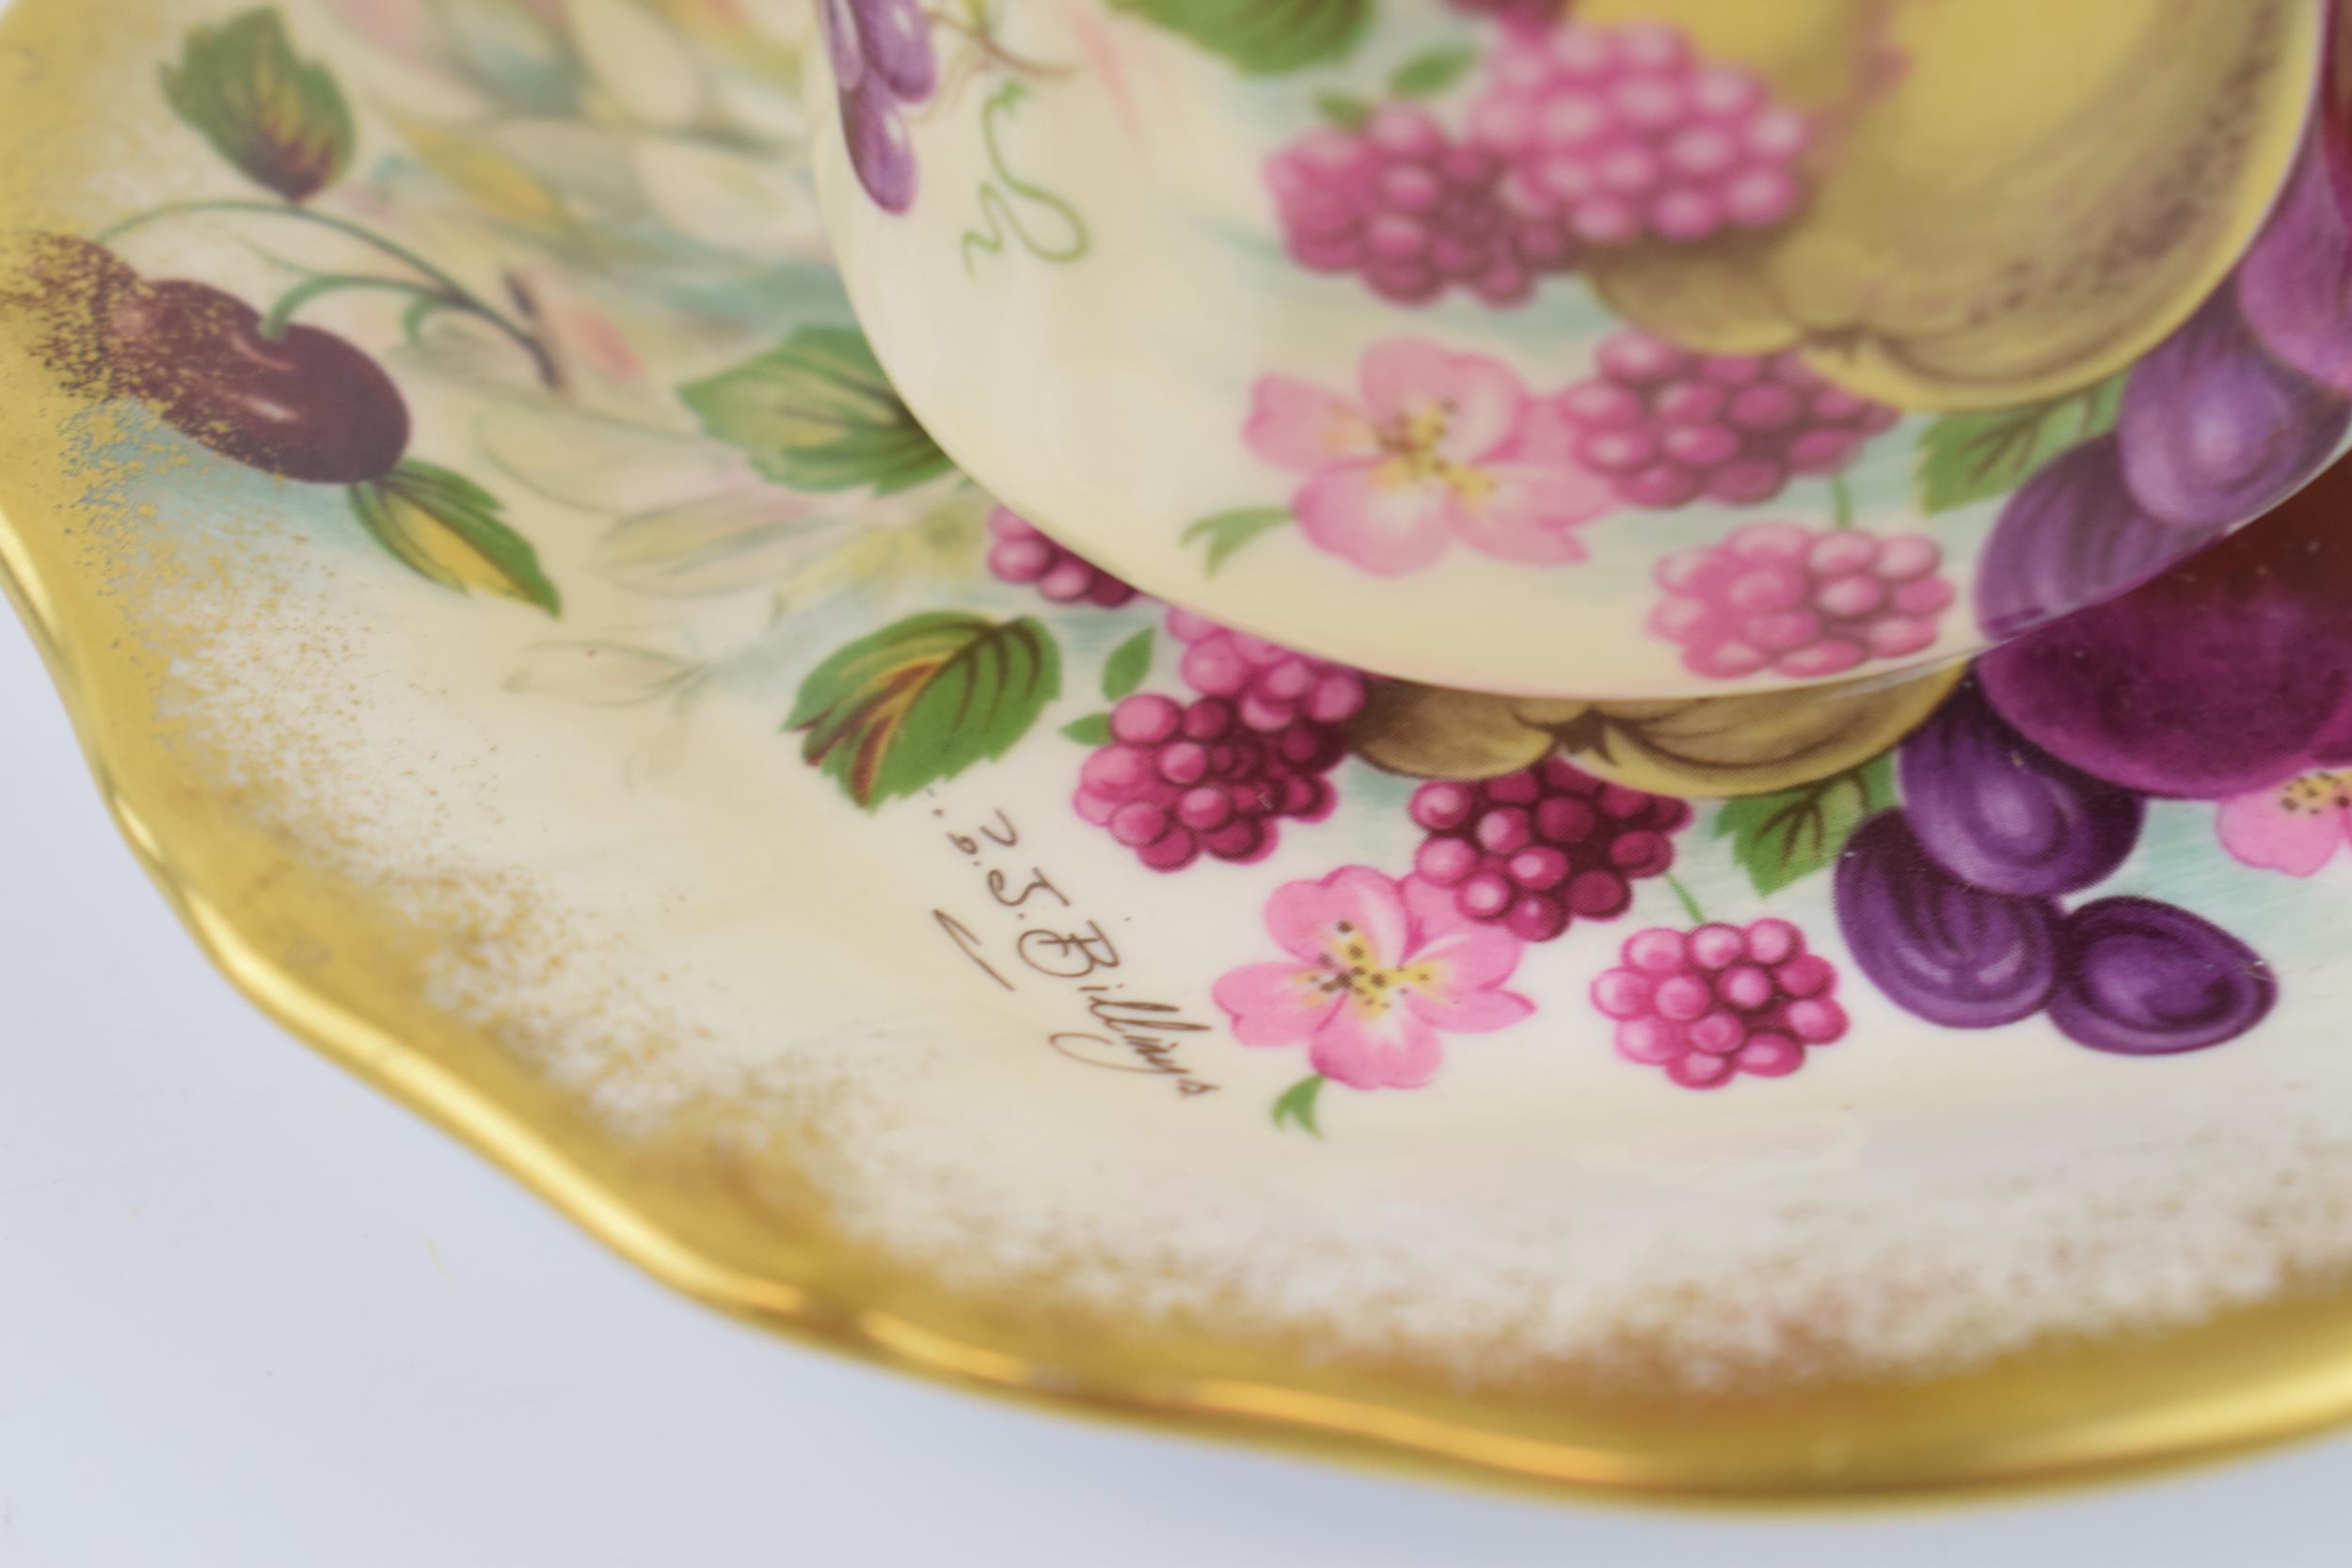 Hammersley bone china fruit pattern cup and saucer 'R J Billings' (2). In good condition with no - Image 3 of 5